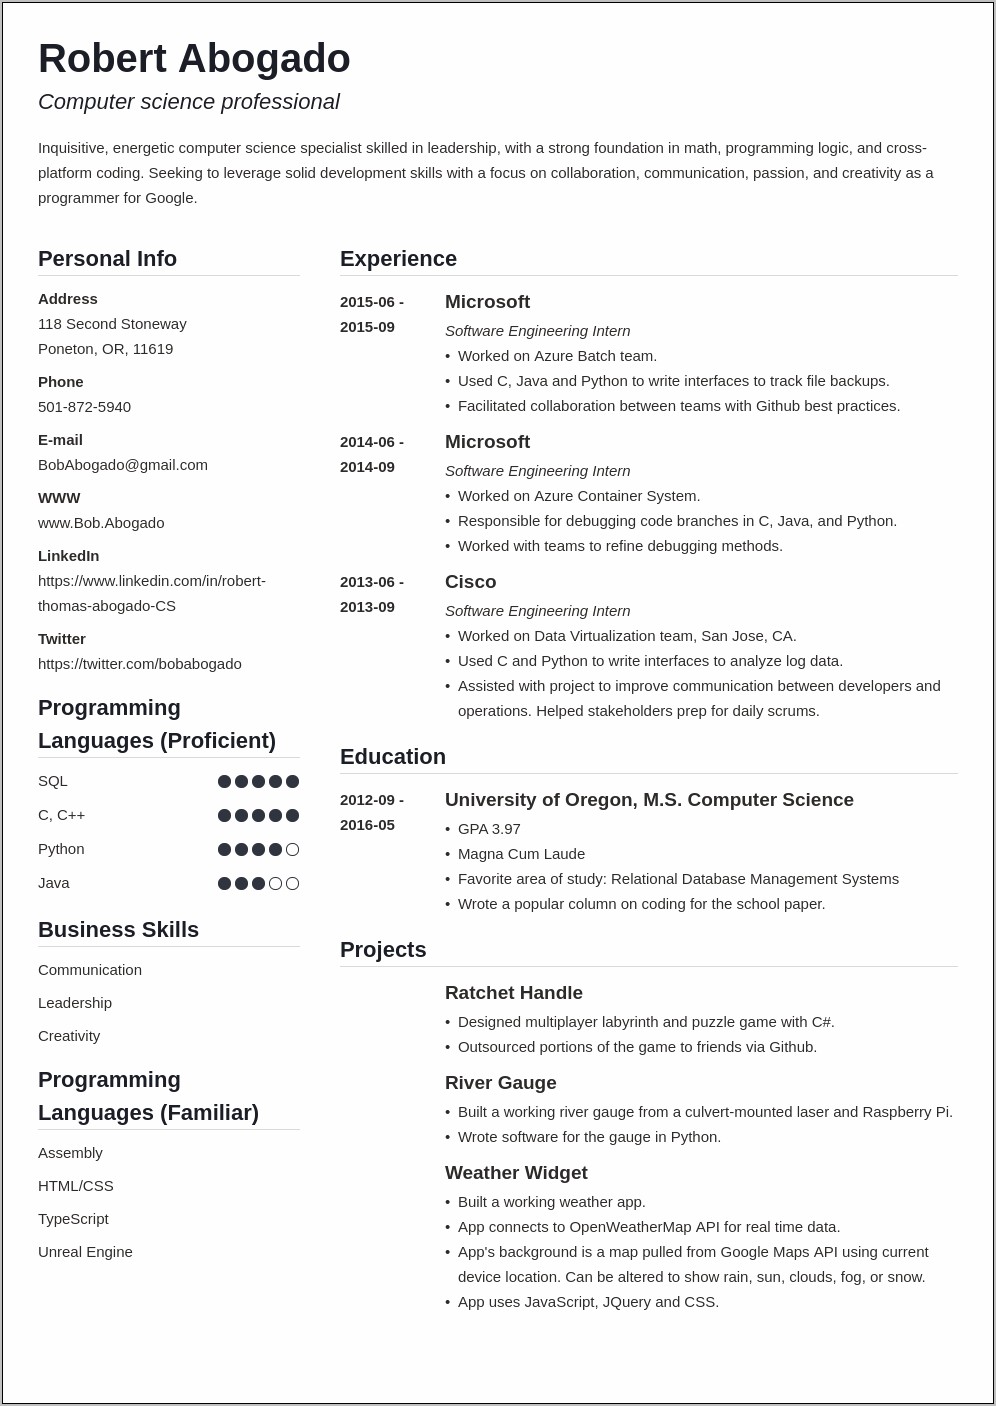 Resume Skills For Computer Science